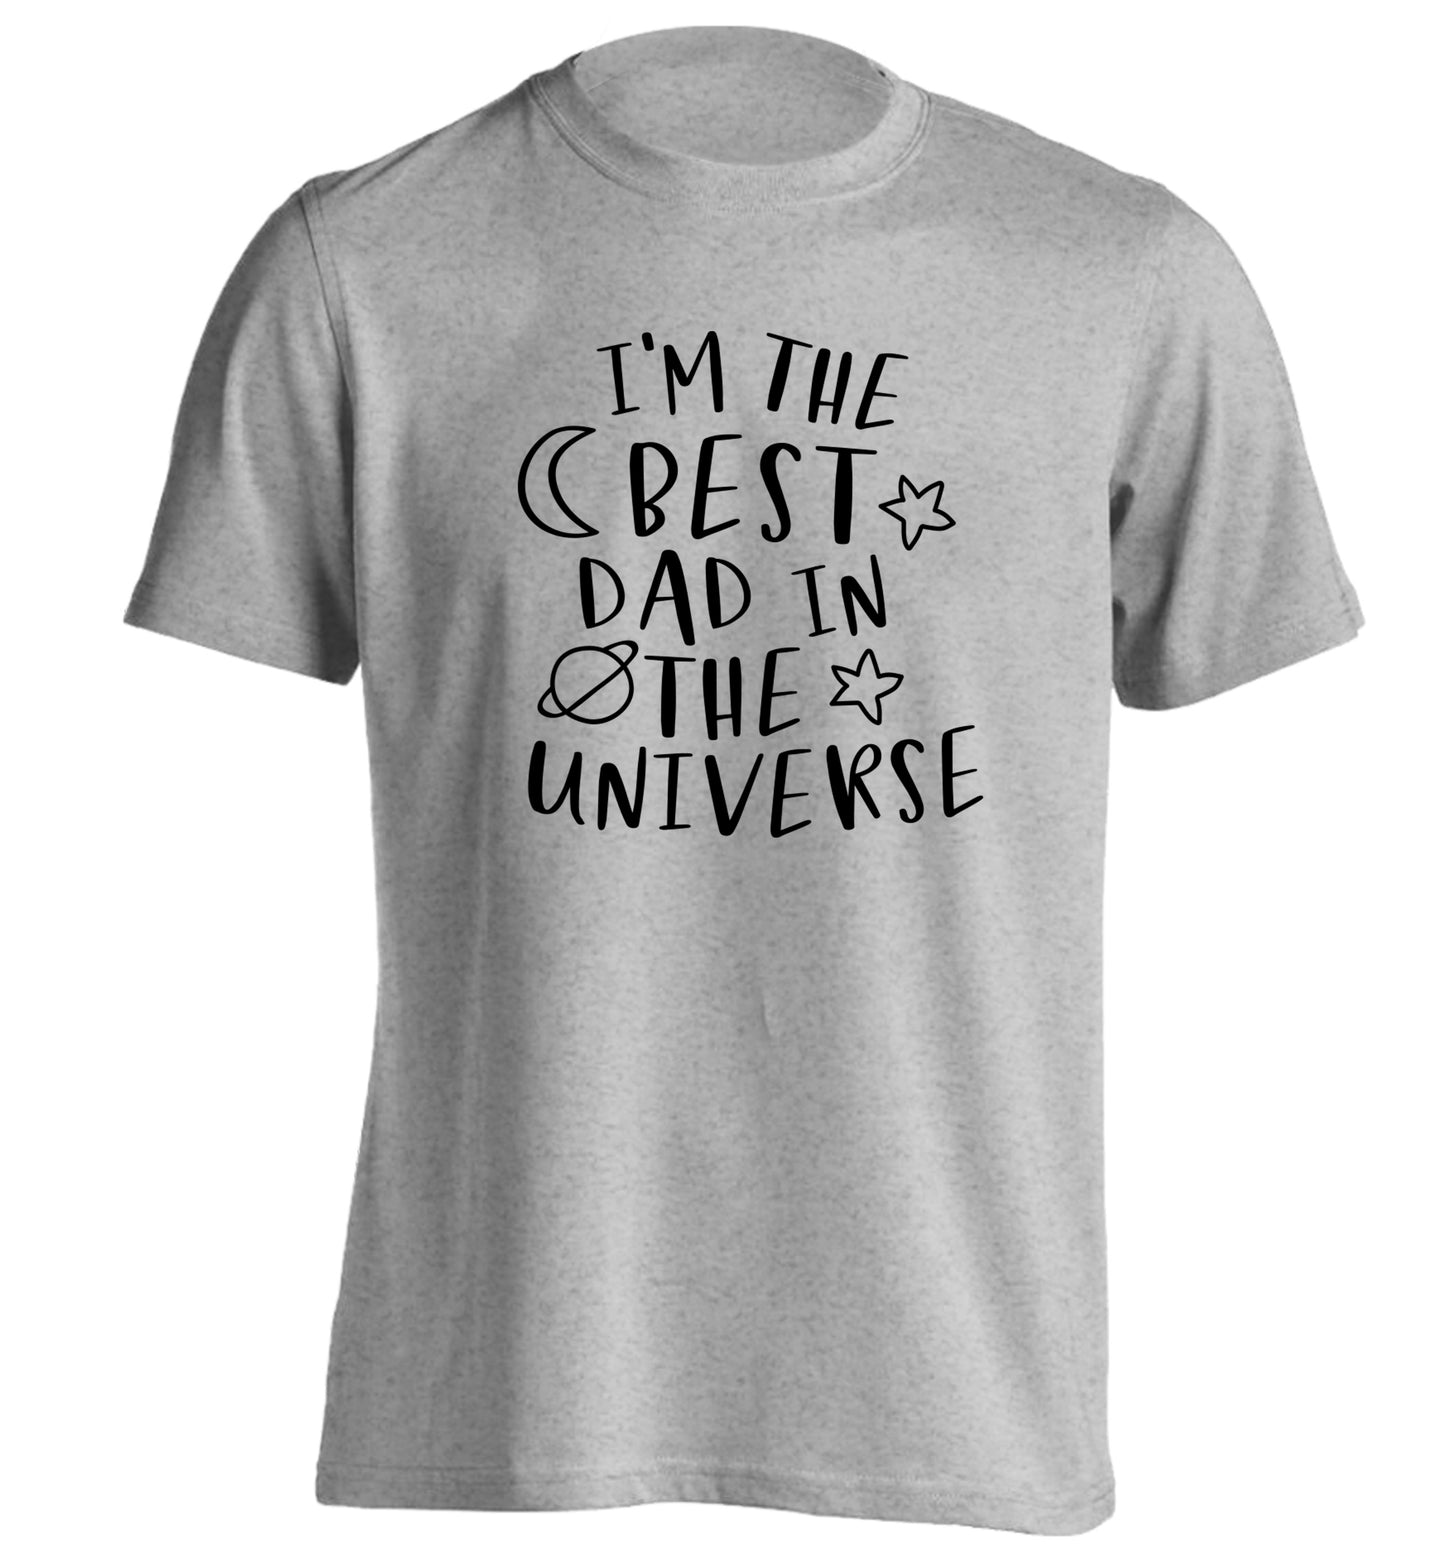 I'm the best dad in the universe adults unisex grey Tshirt 2XL